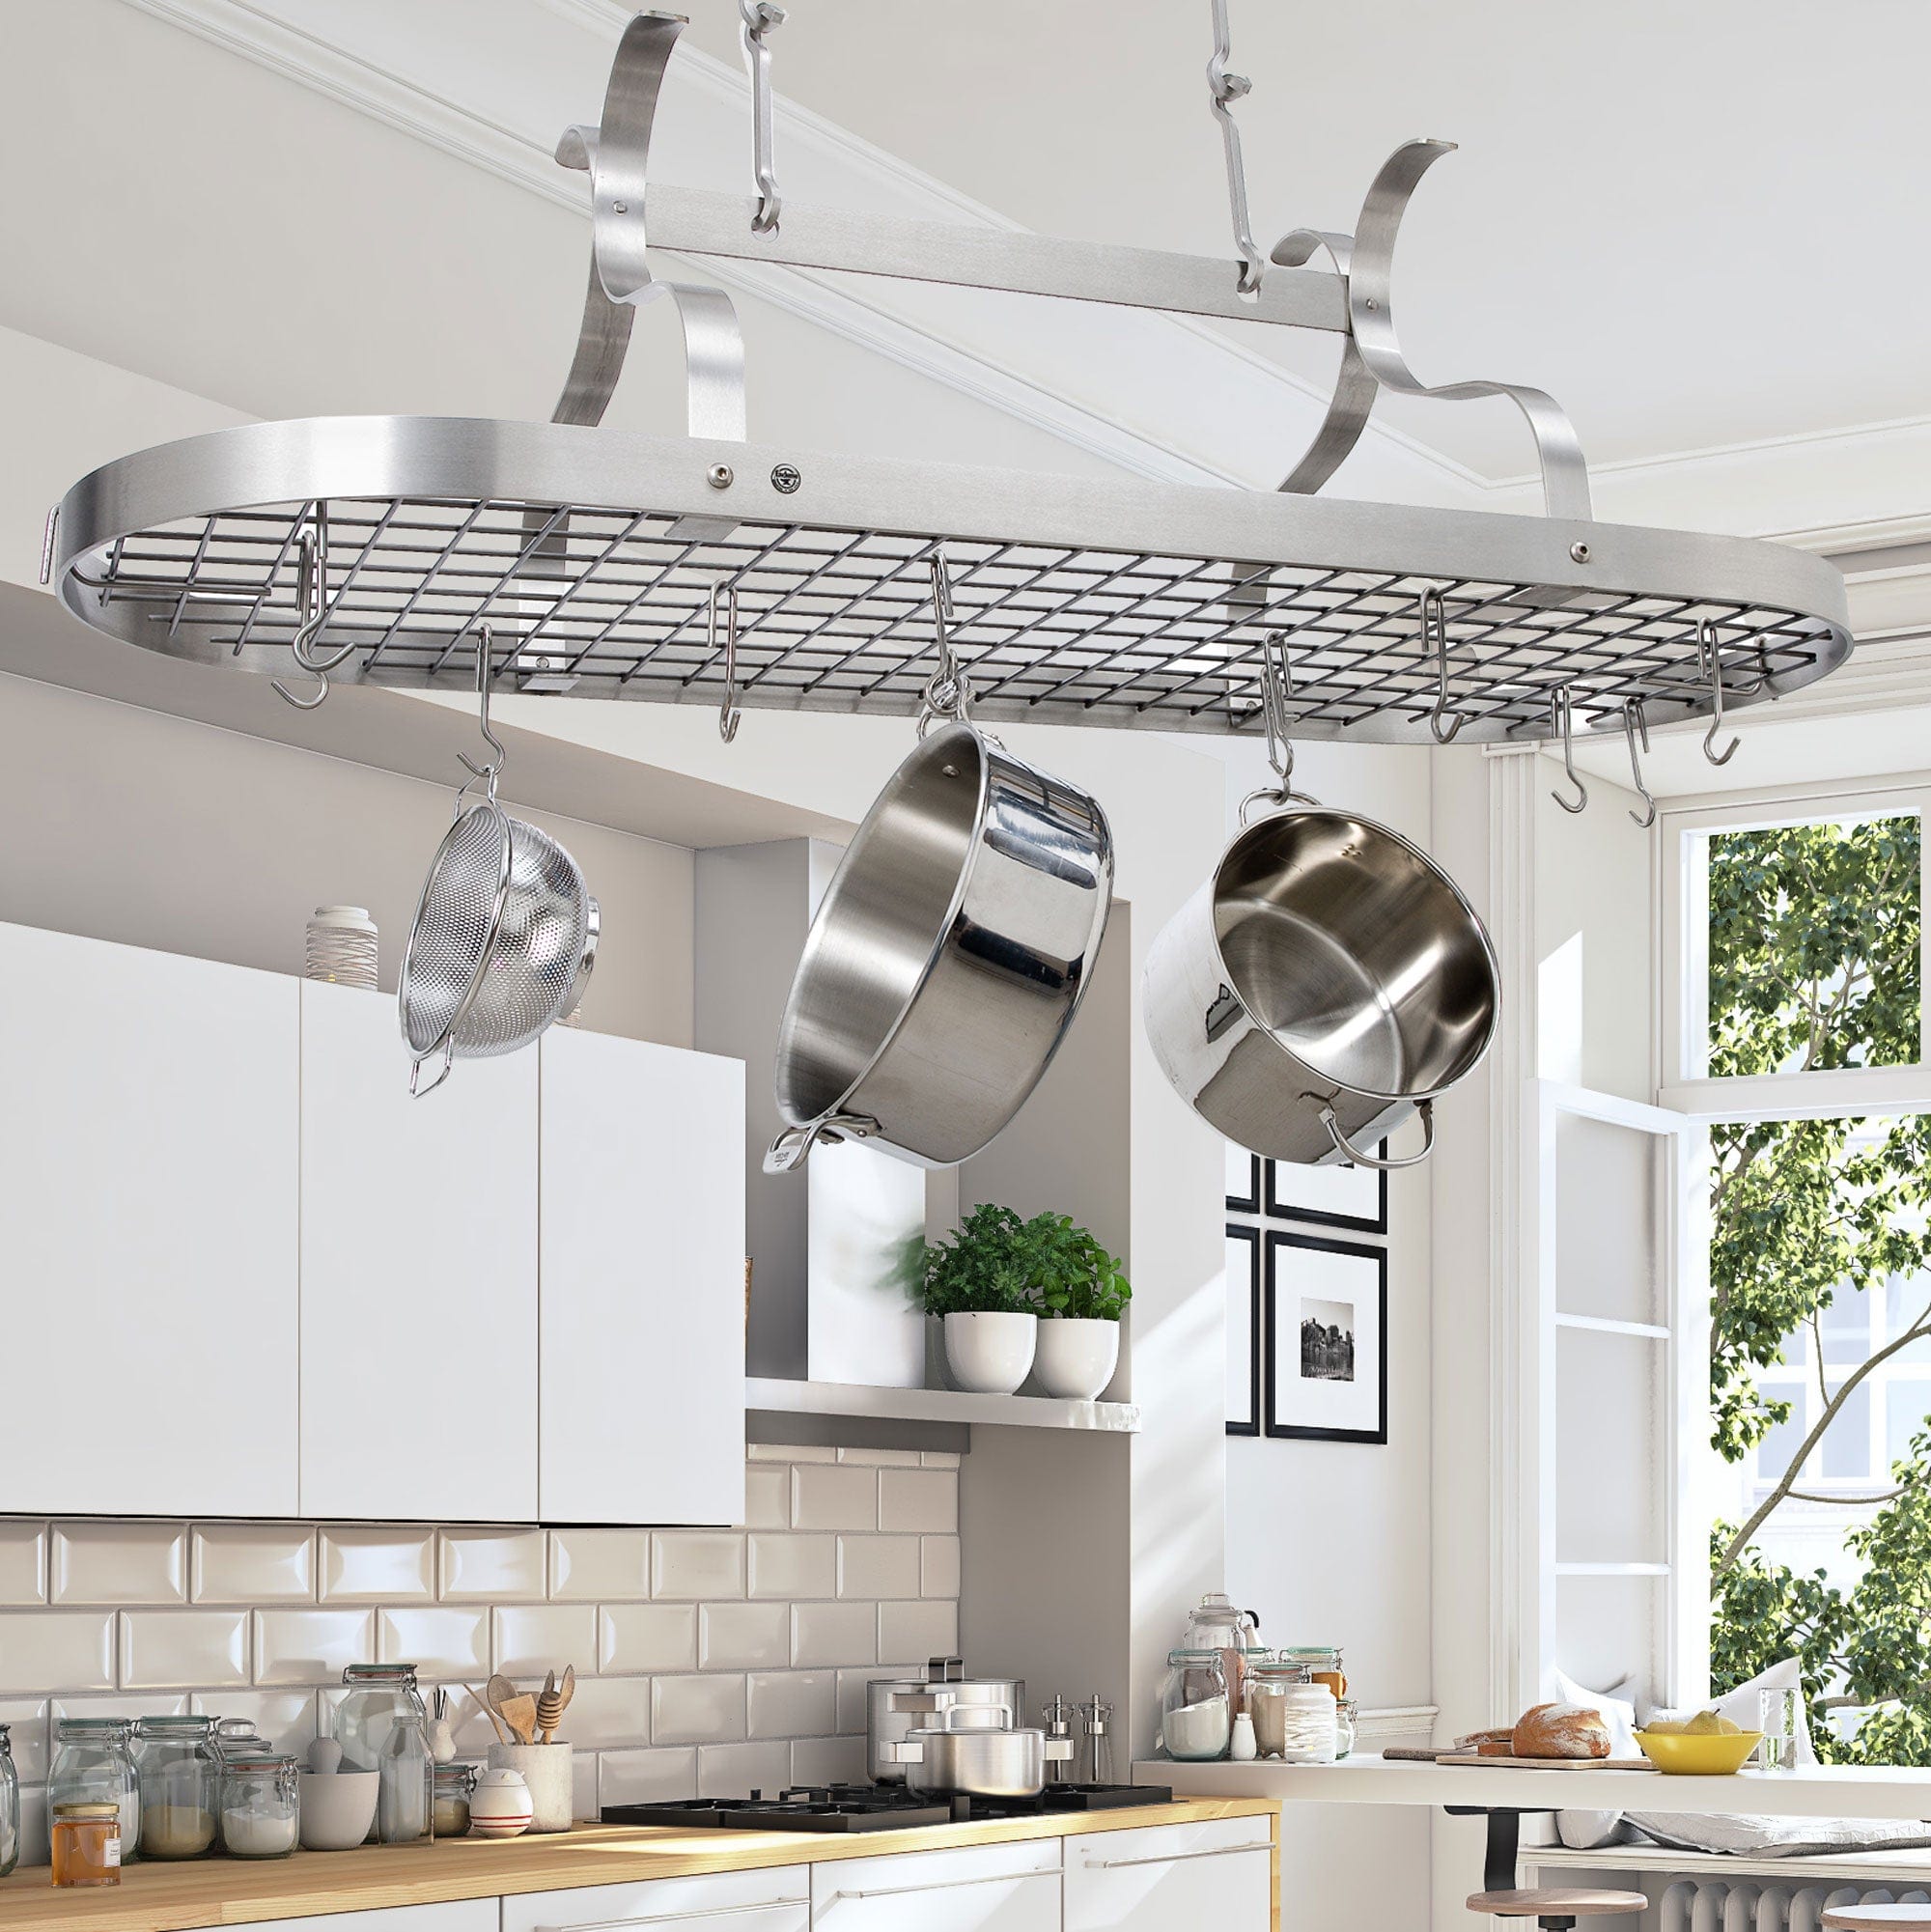 Enclume Scroll Arm Oval Ceiling Pot Rack w/ 24 Hooks Enclume Design  Products